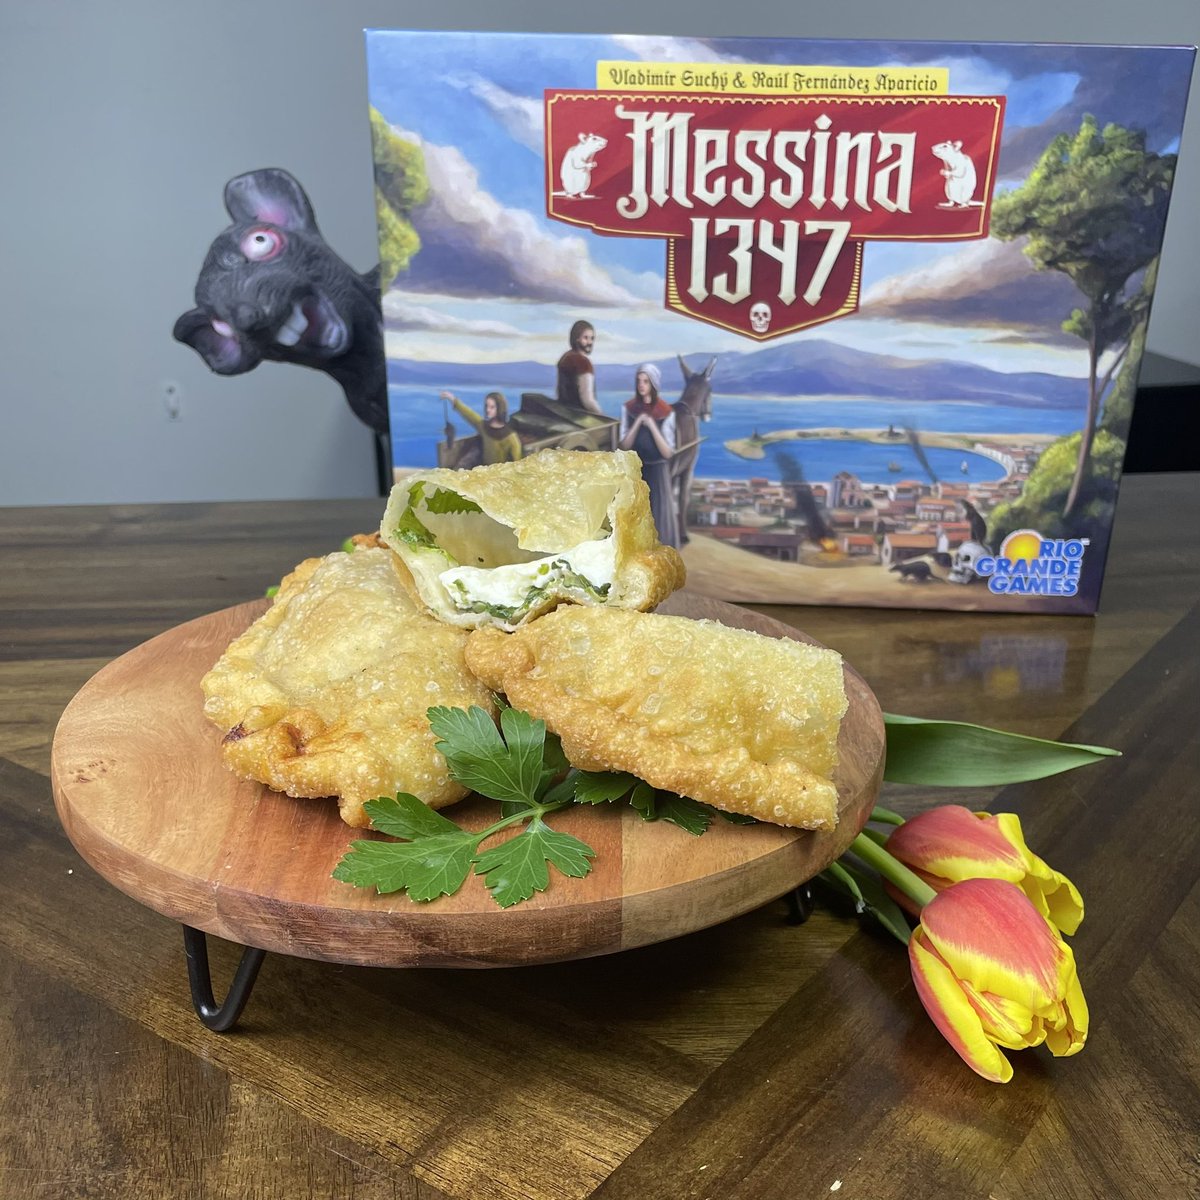 We are hard at work on our second episode on #Messina1347 (@riograndegames). Here’s a sneak peek of the delicious spread we made for this game… Pitoni Messinesi (fried calzone) traditional street food from Messina. What would you fill your pitoni with?